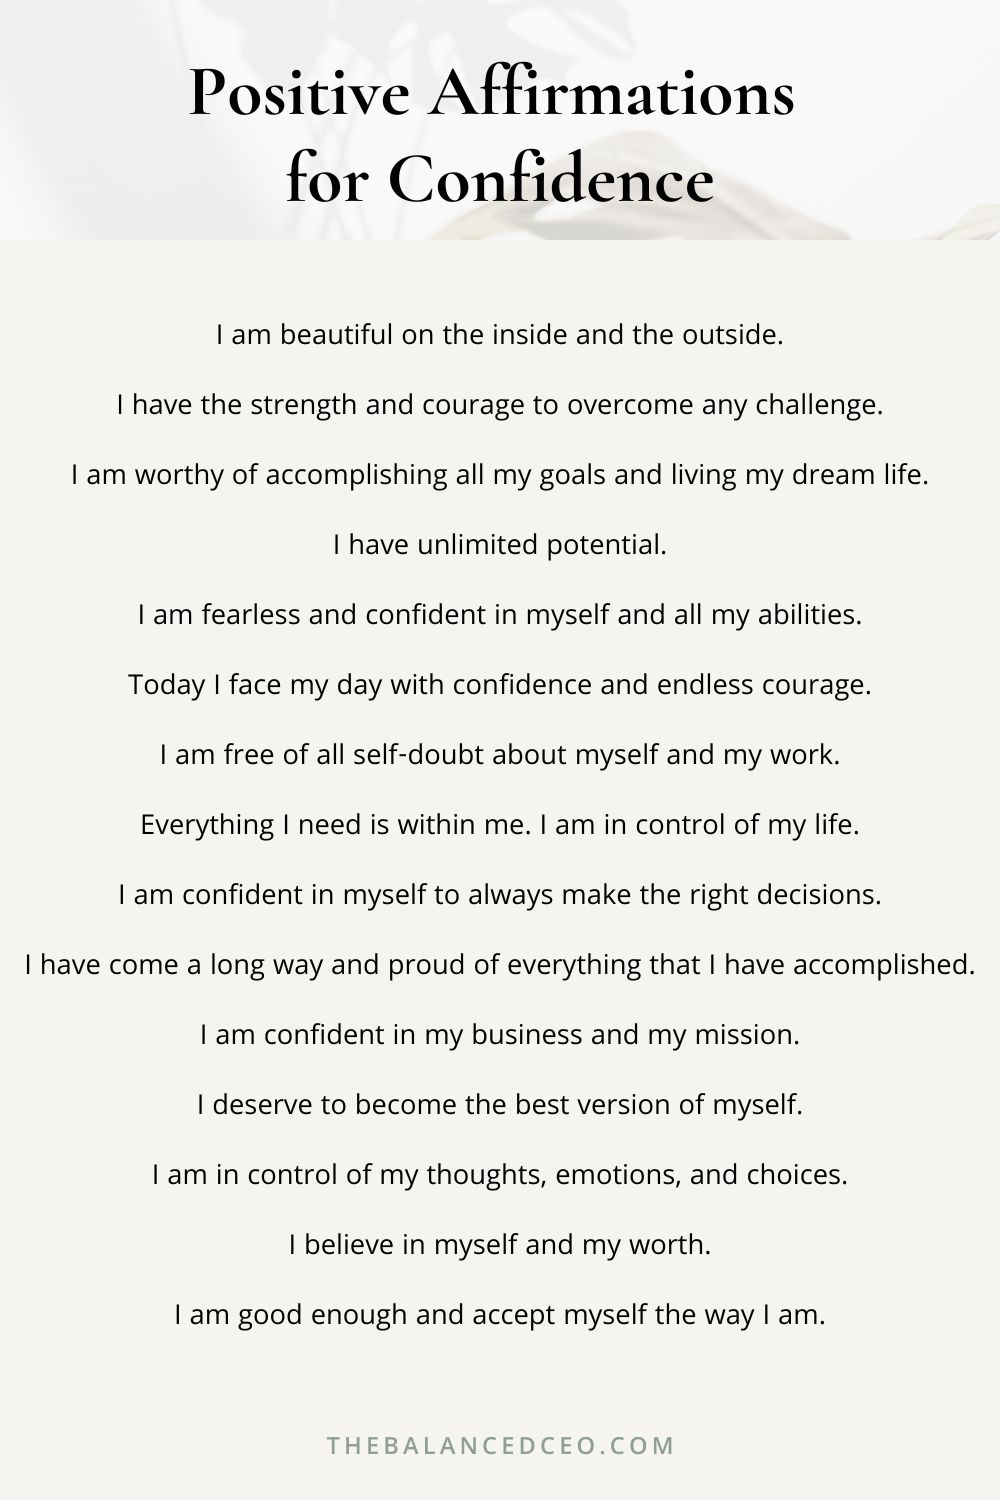 Positive Affirmations for Confidence